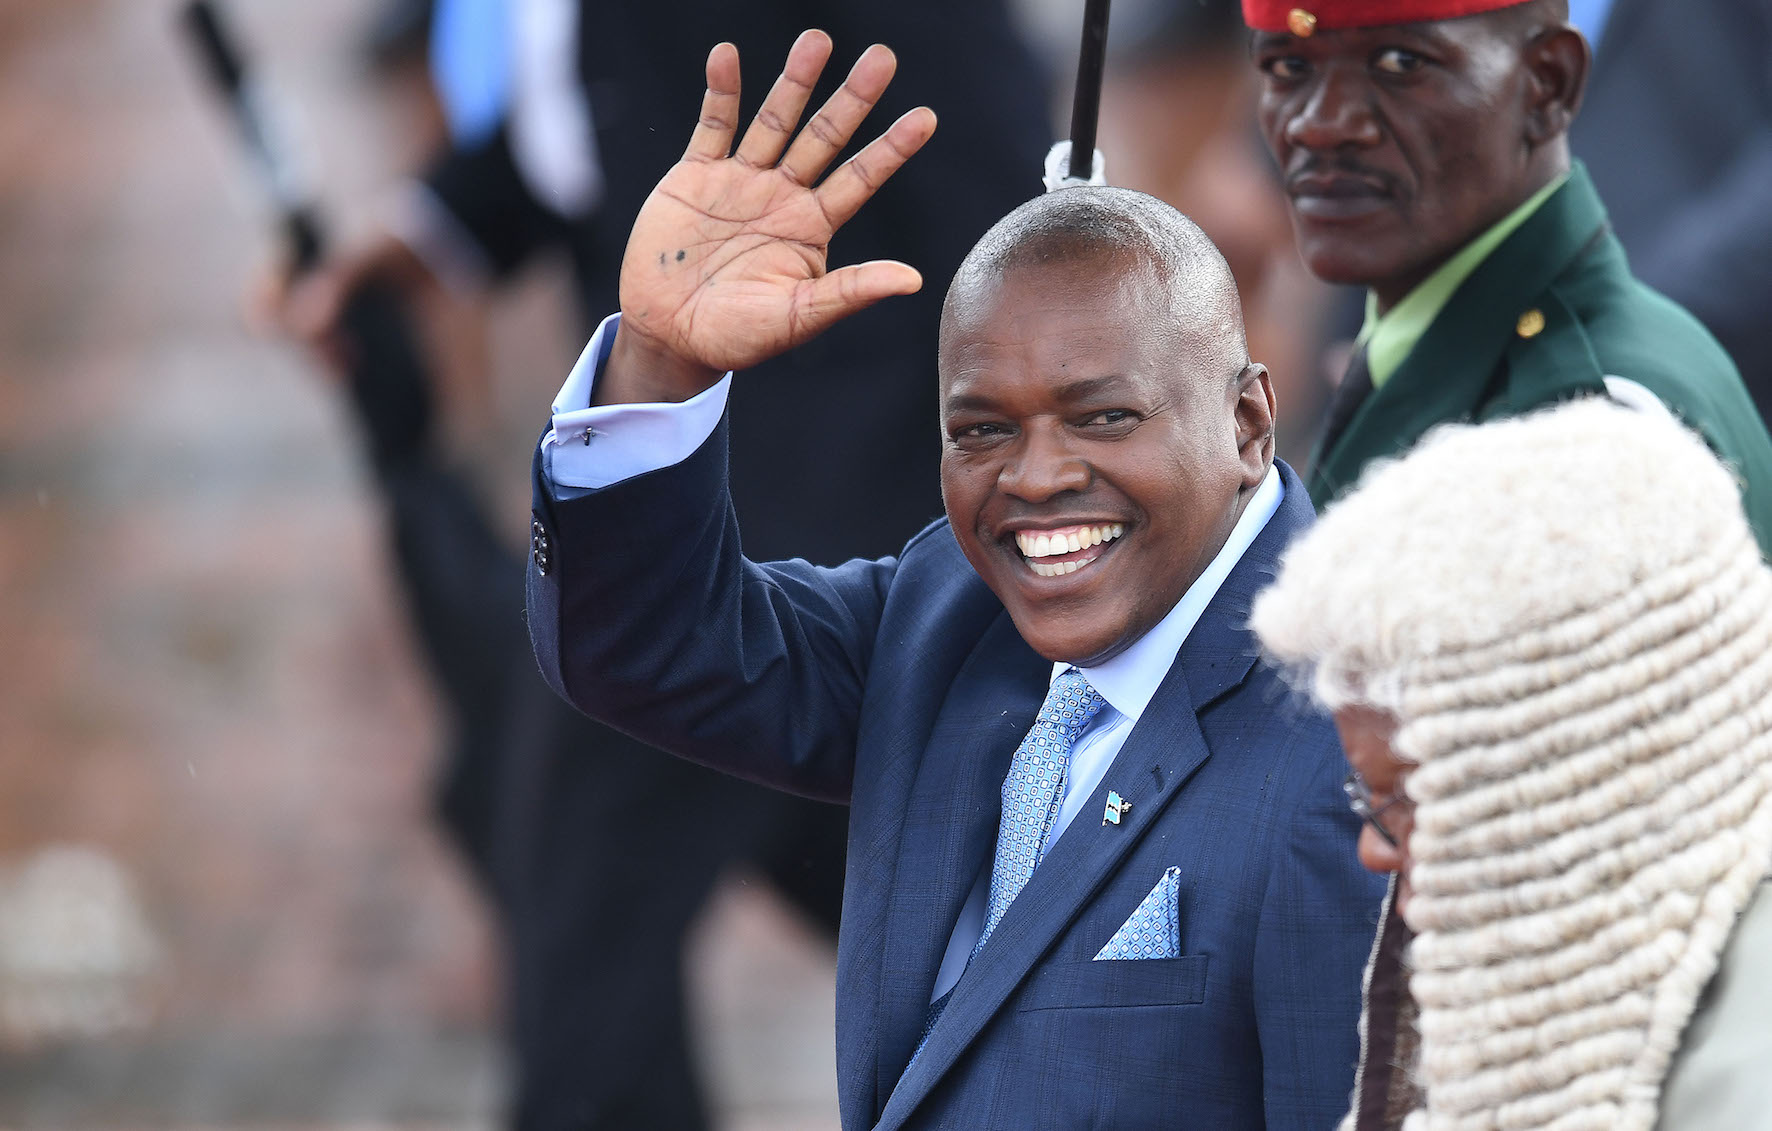 Botswana President, Mokgweetsi Masisi, Nominated for the African Leadership Persons of the Year 2019